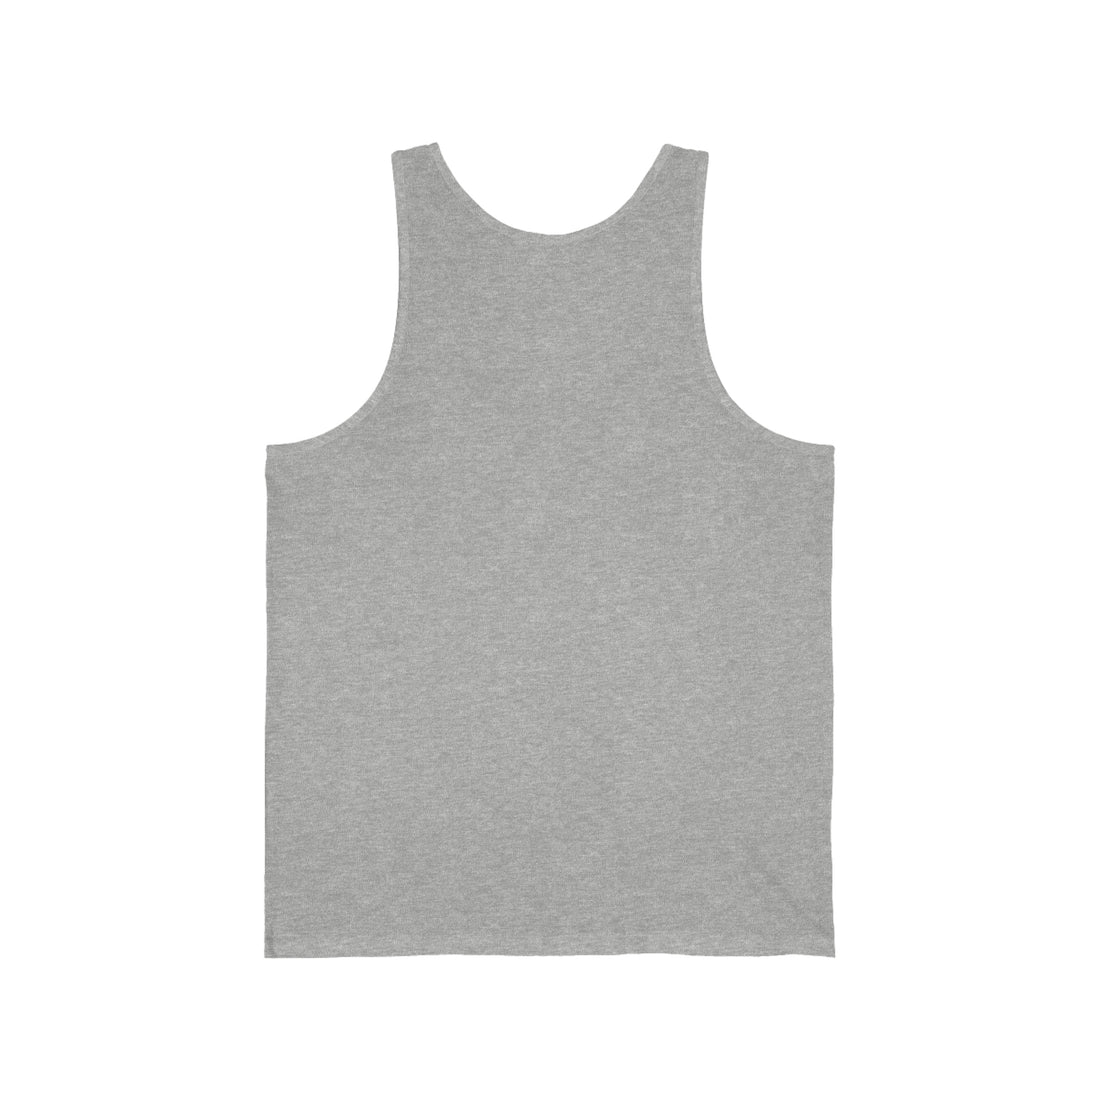 I Love My Cochlear Implant - Unisex Jersey Tank Top